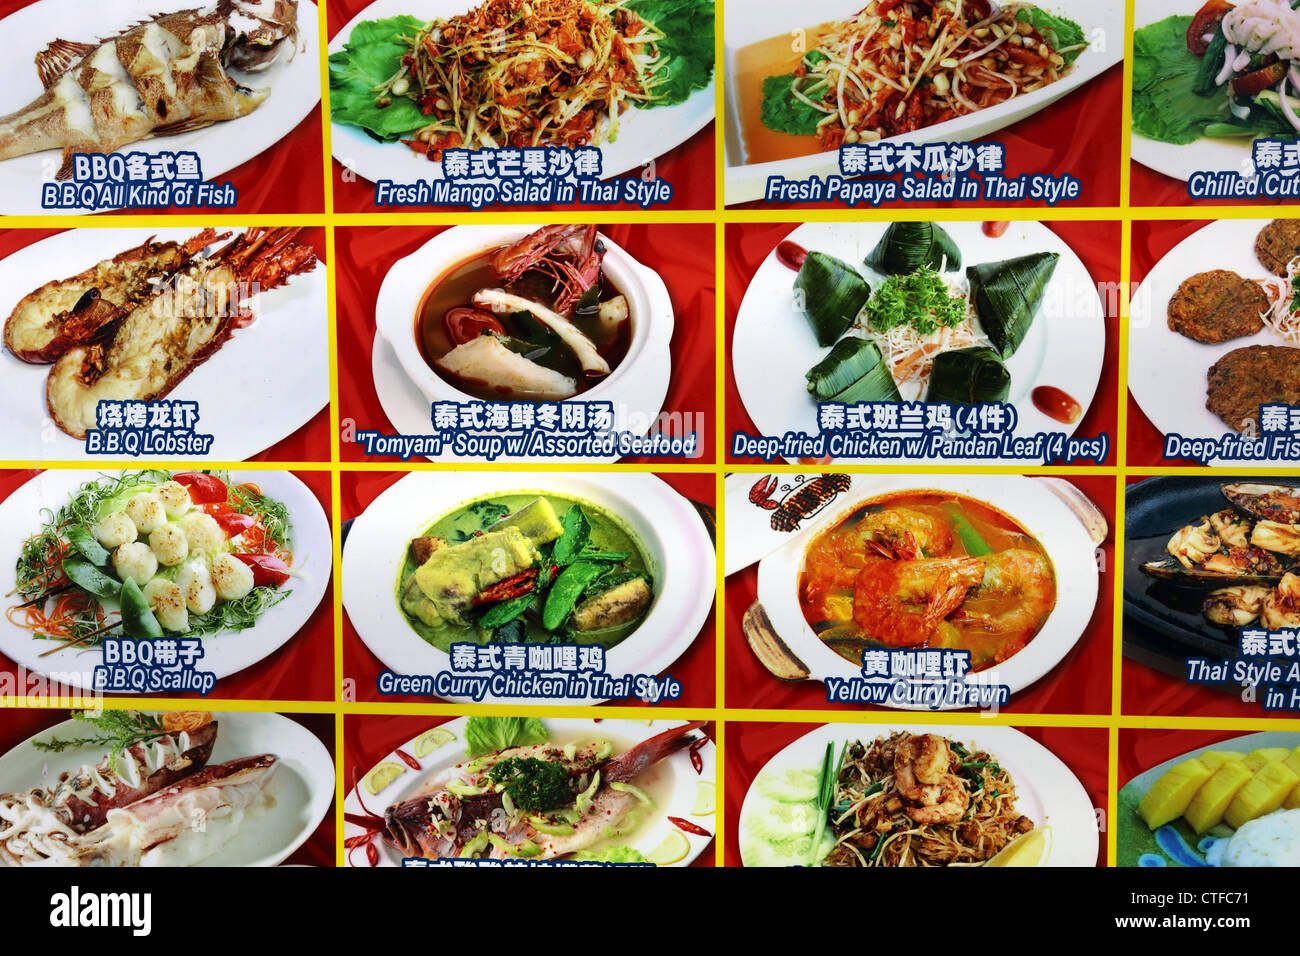 Food court menu boards with photos of each dish. Stock Photo